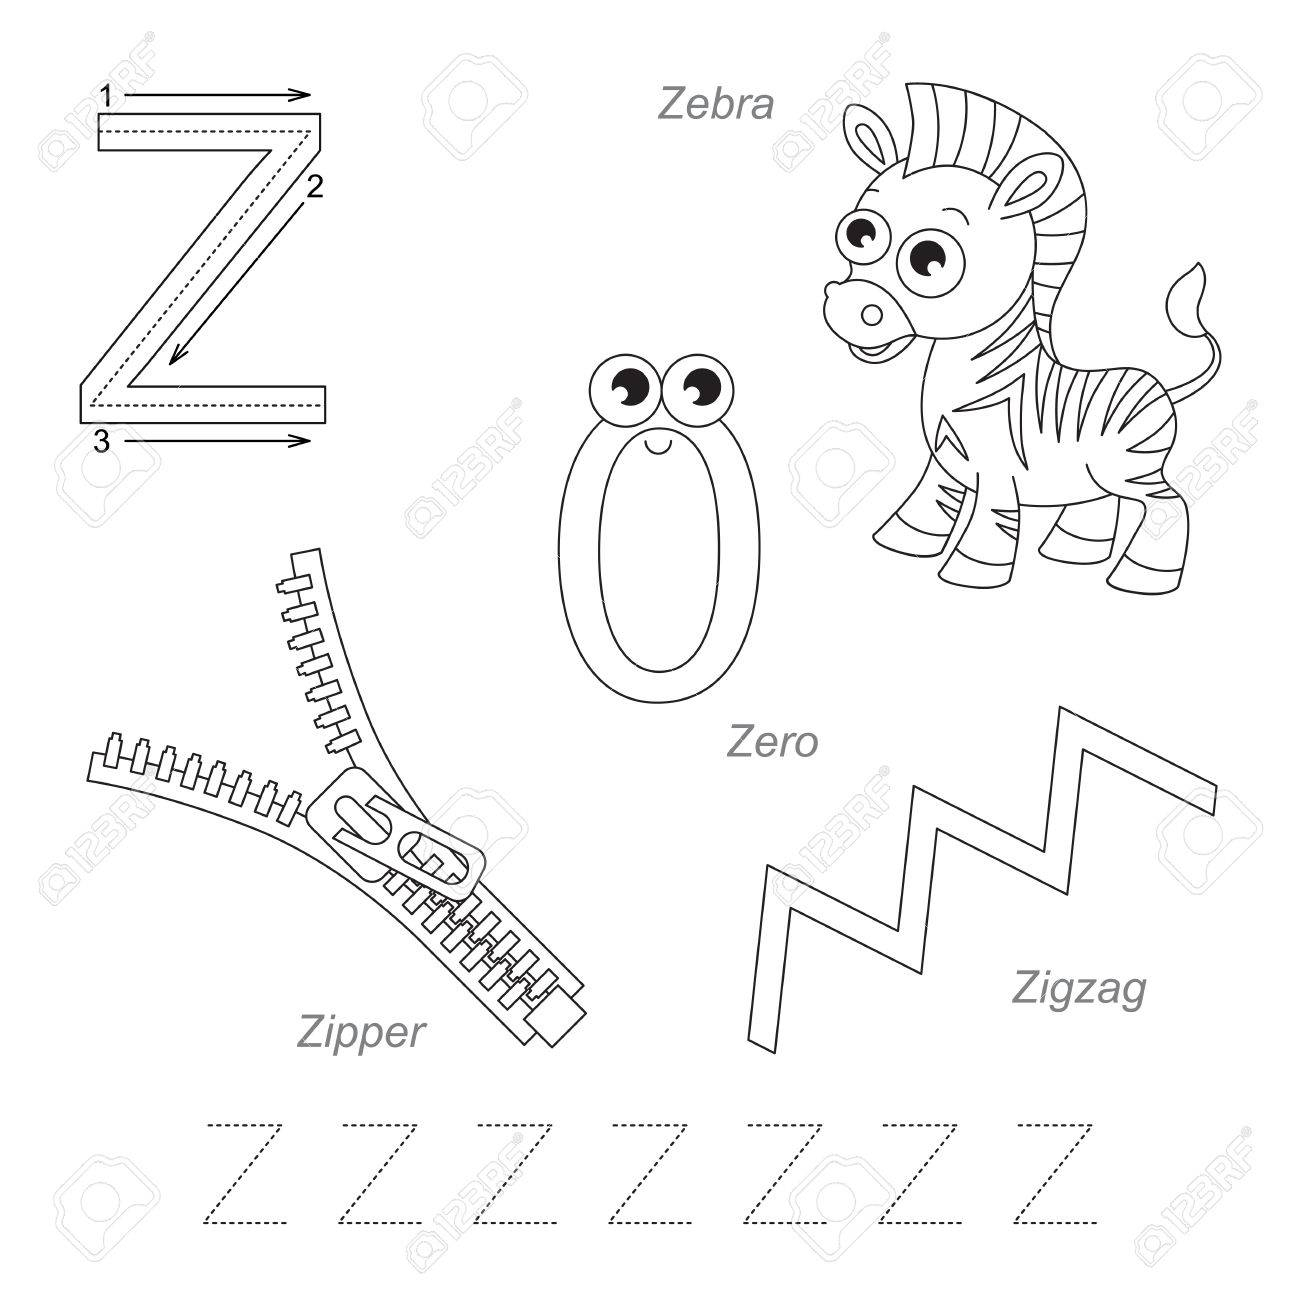 Tracing Worksheet For Children. Full English Alphabet From A..